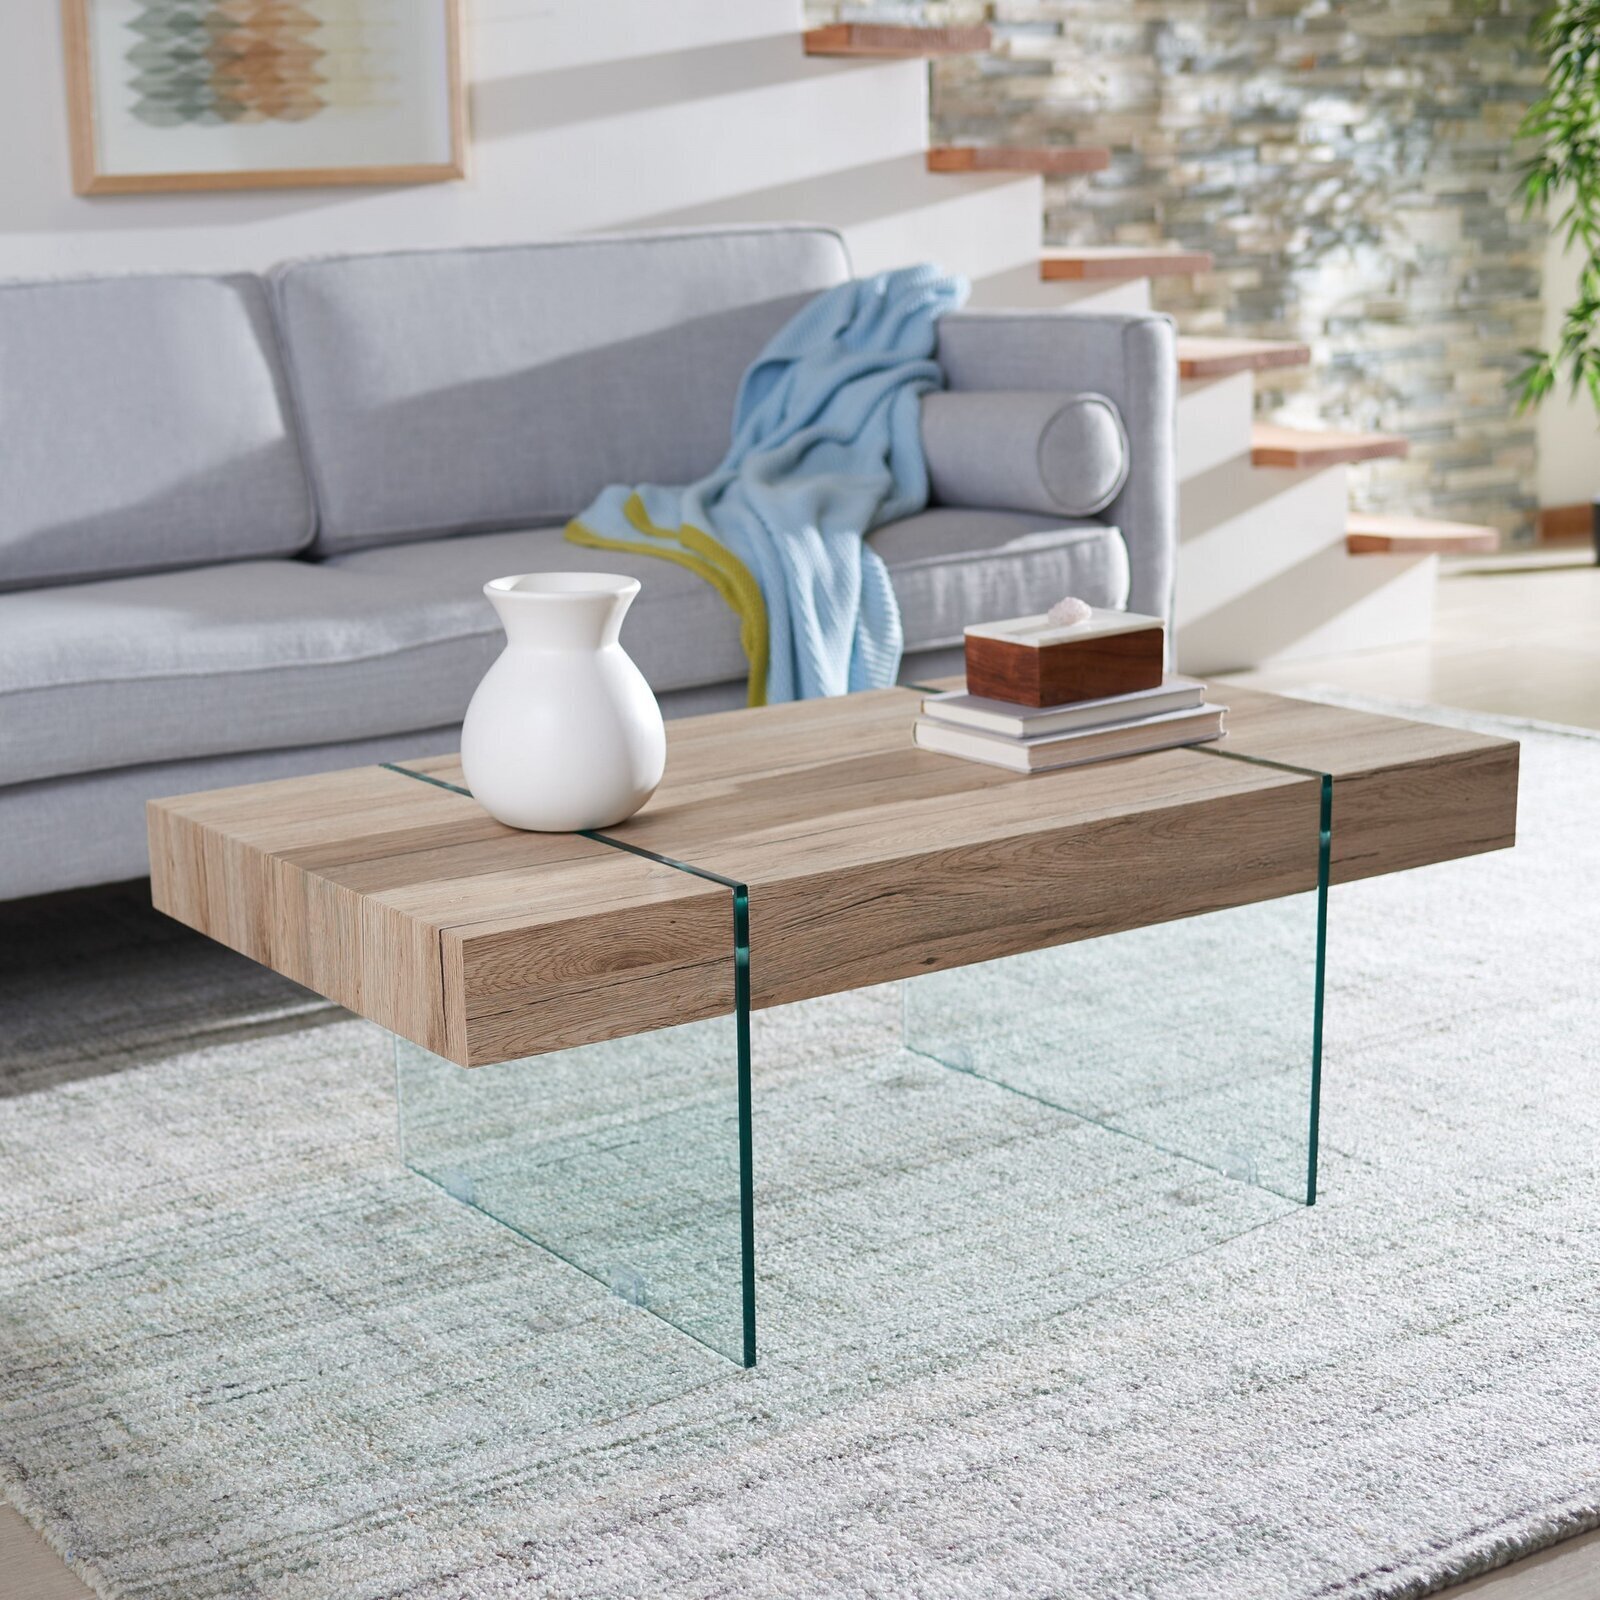 Natural Wood With Glass Legs Coffee Table 